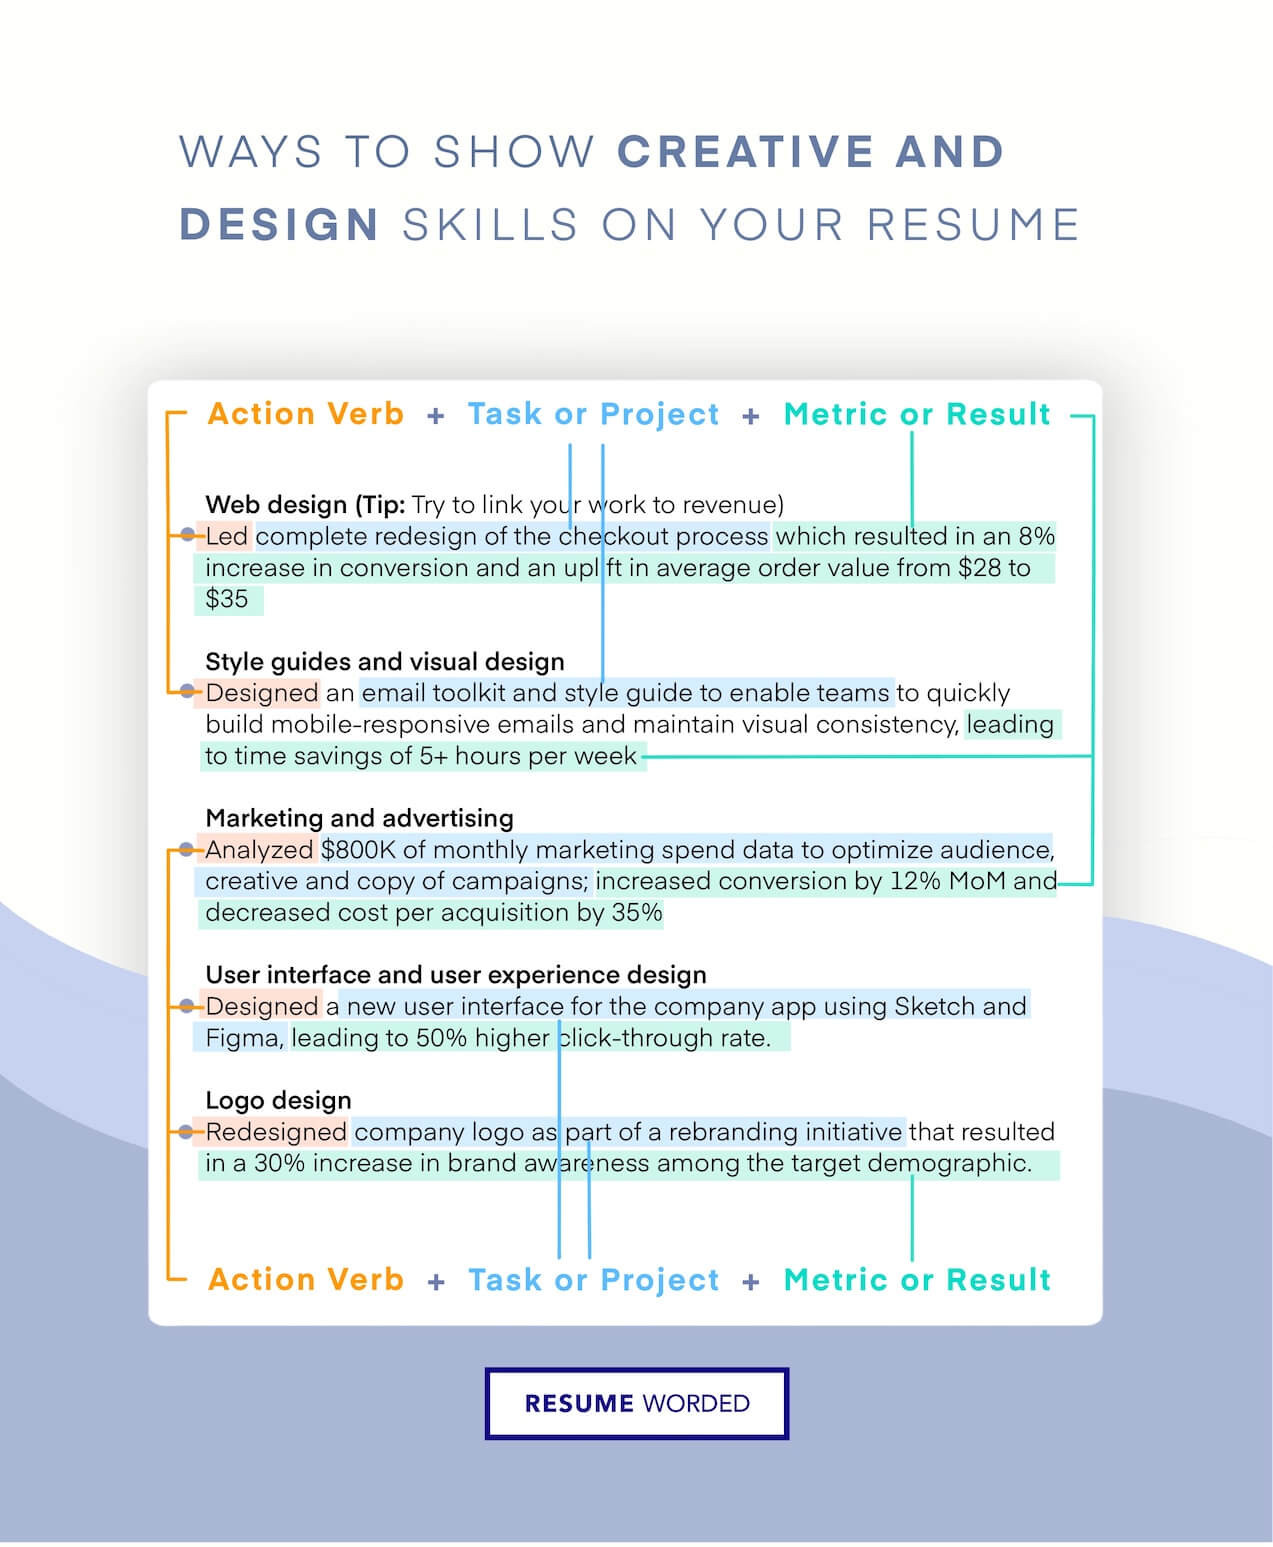 Sample Resume for Furniture Store Design Consultant Resume Skills and Keywords for Interior Design Consultant (updated …